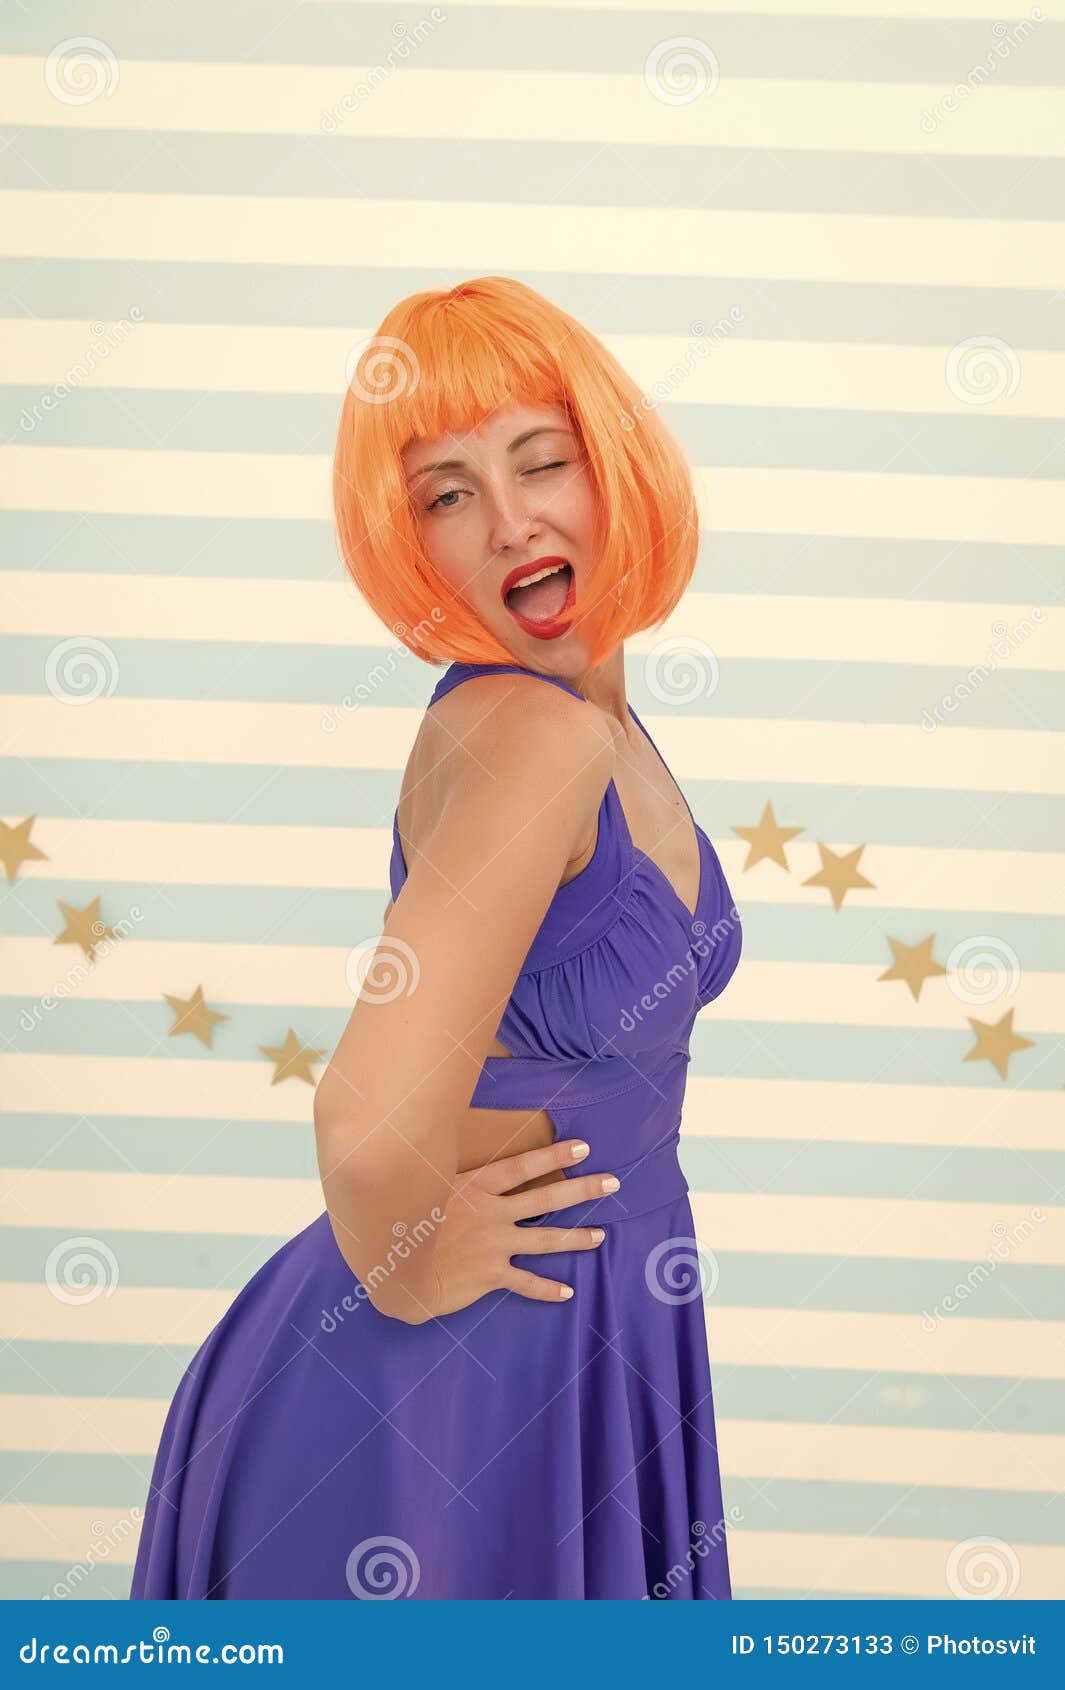 Crazy Girl Winking. Girl with Orange Hair and Crazy Look. Fashion Model  that Cause Admiration Stock Image - Image of attractive, facial: 150273133